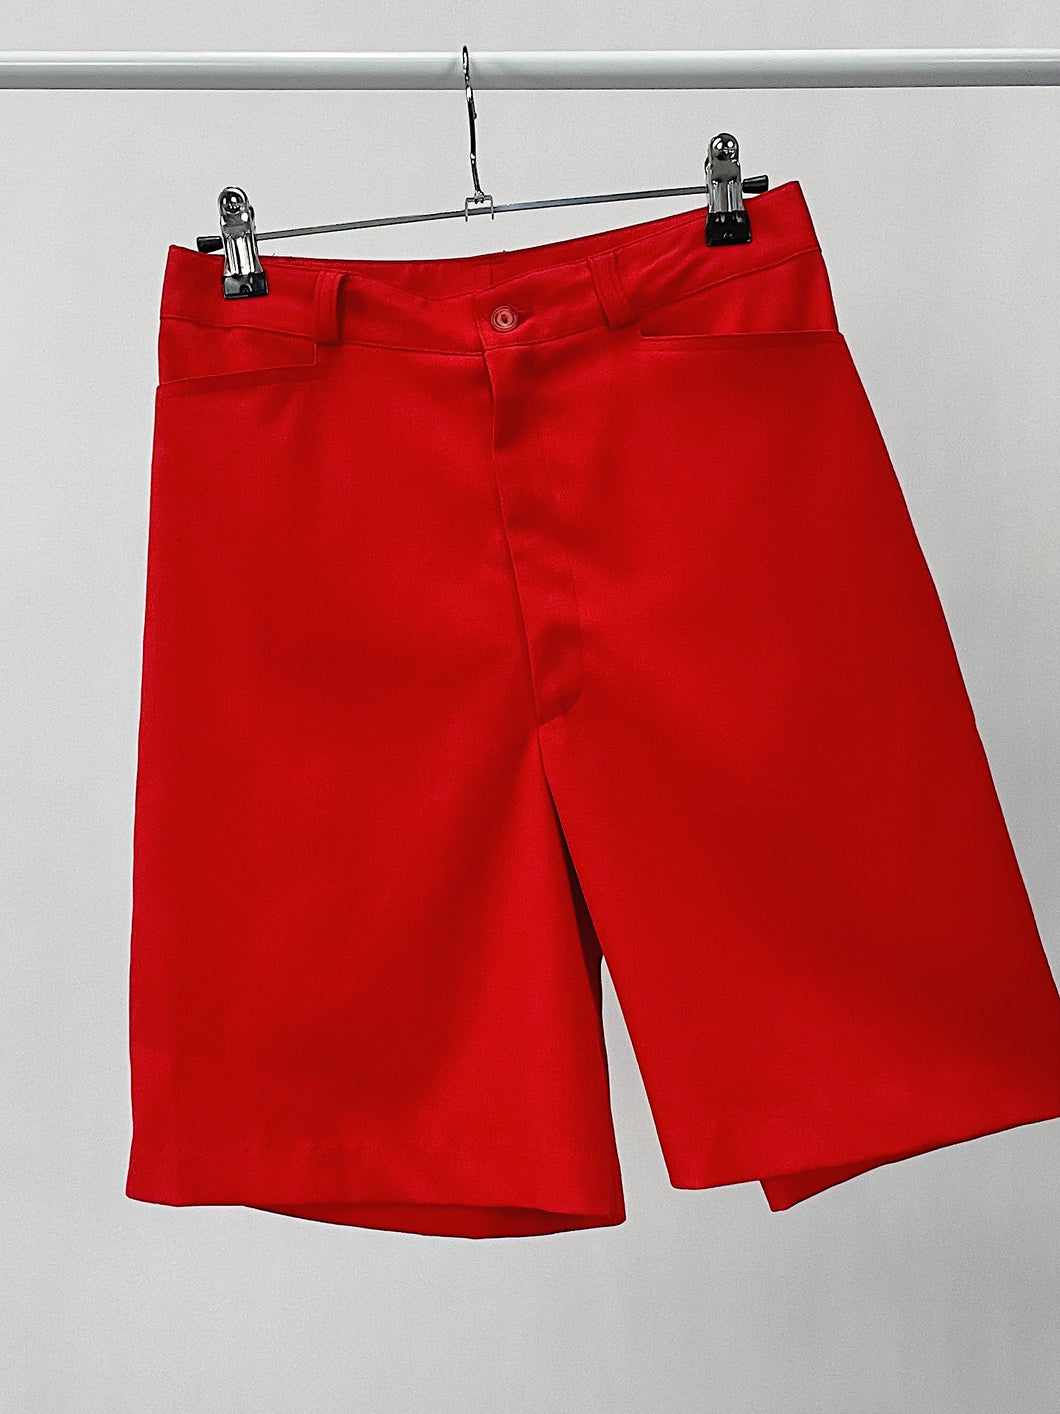 90s Red High Waisted Shorts (W26